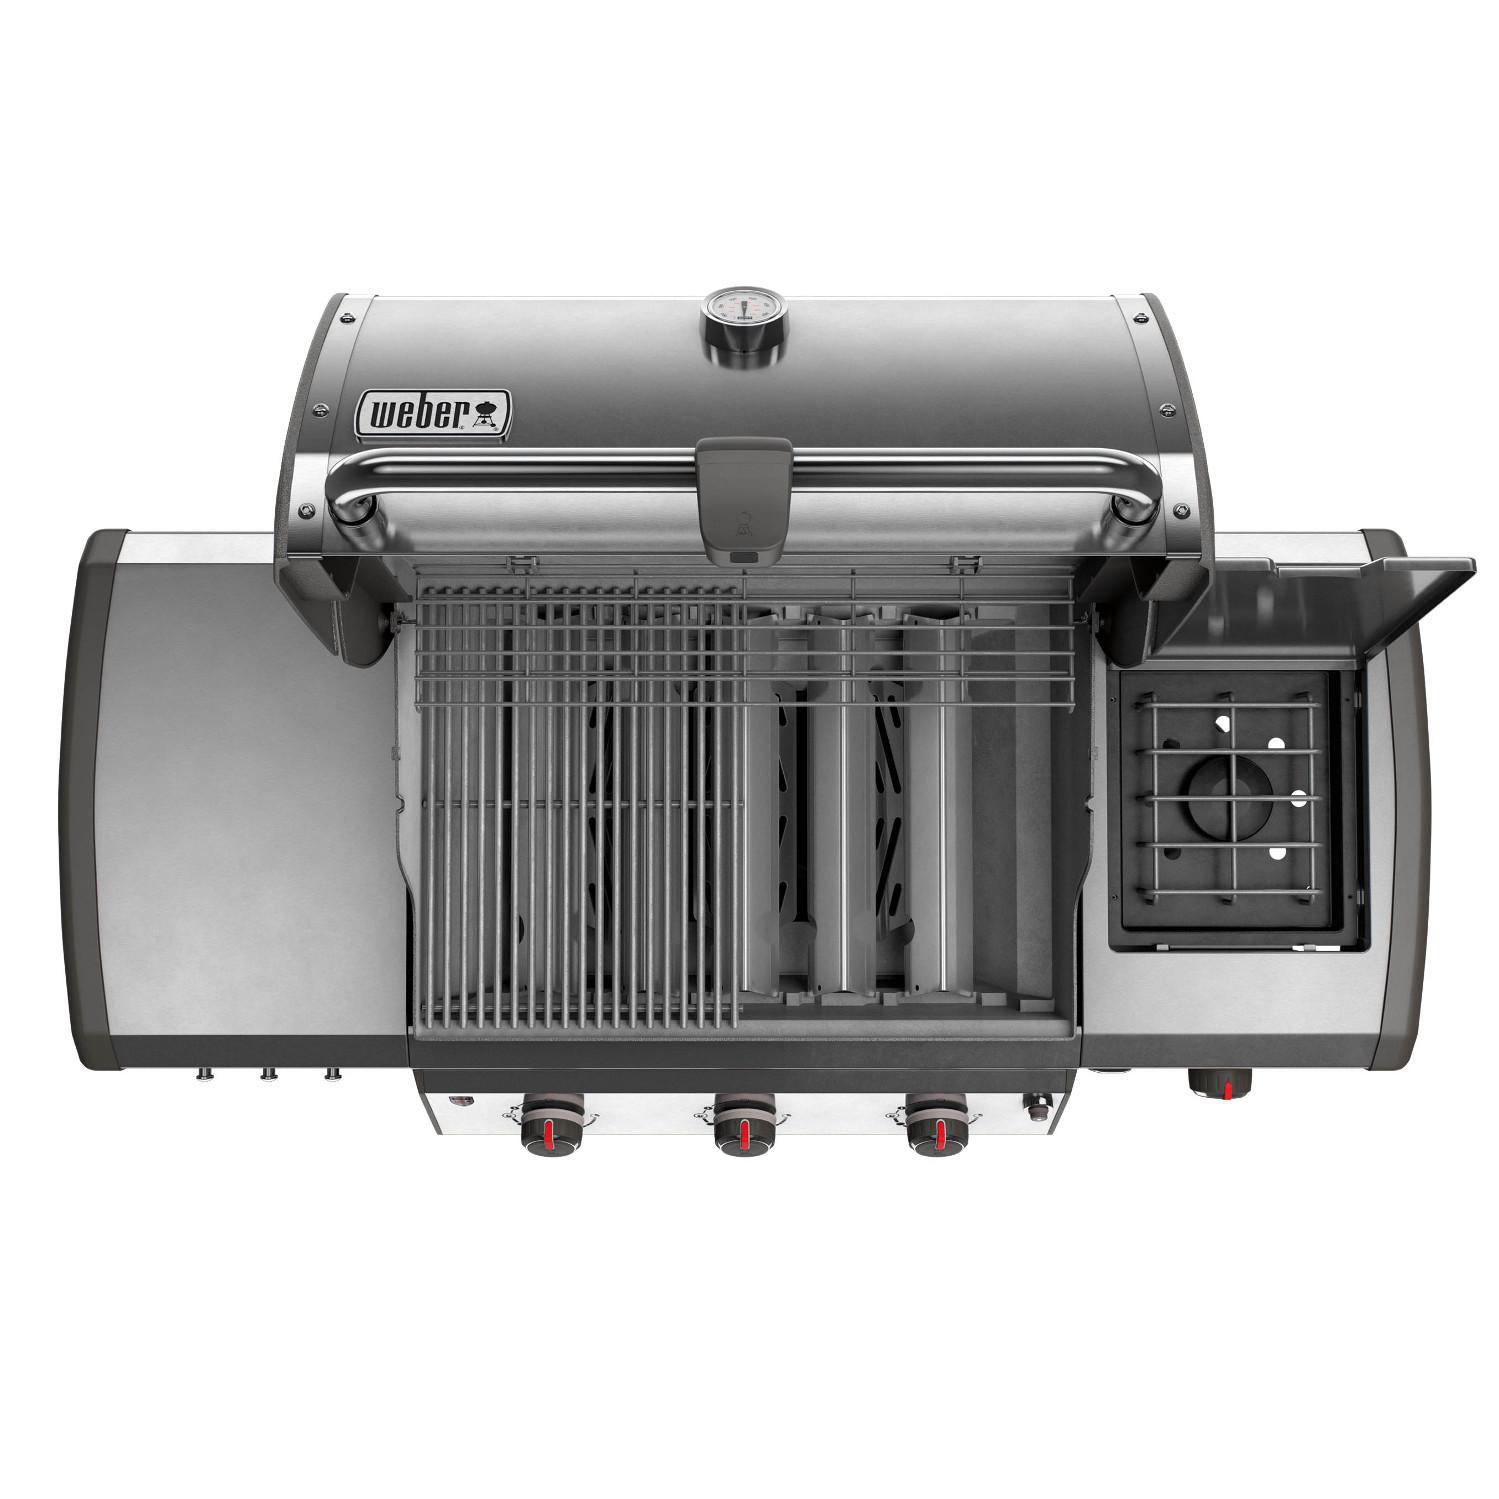 Weber Genesis II LX S-340 Gas Grill Review